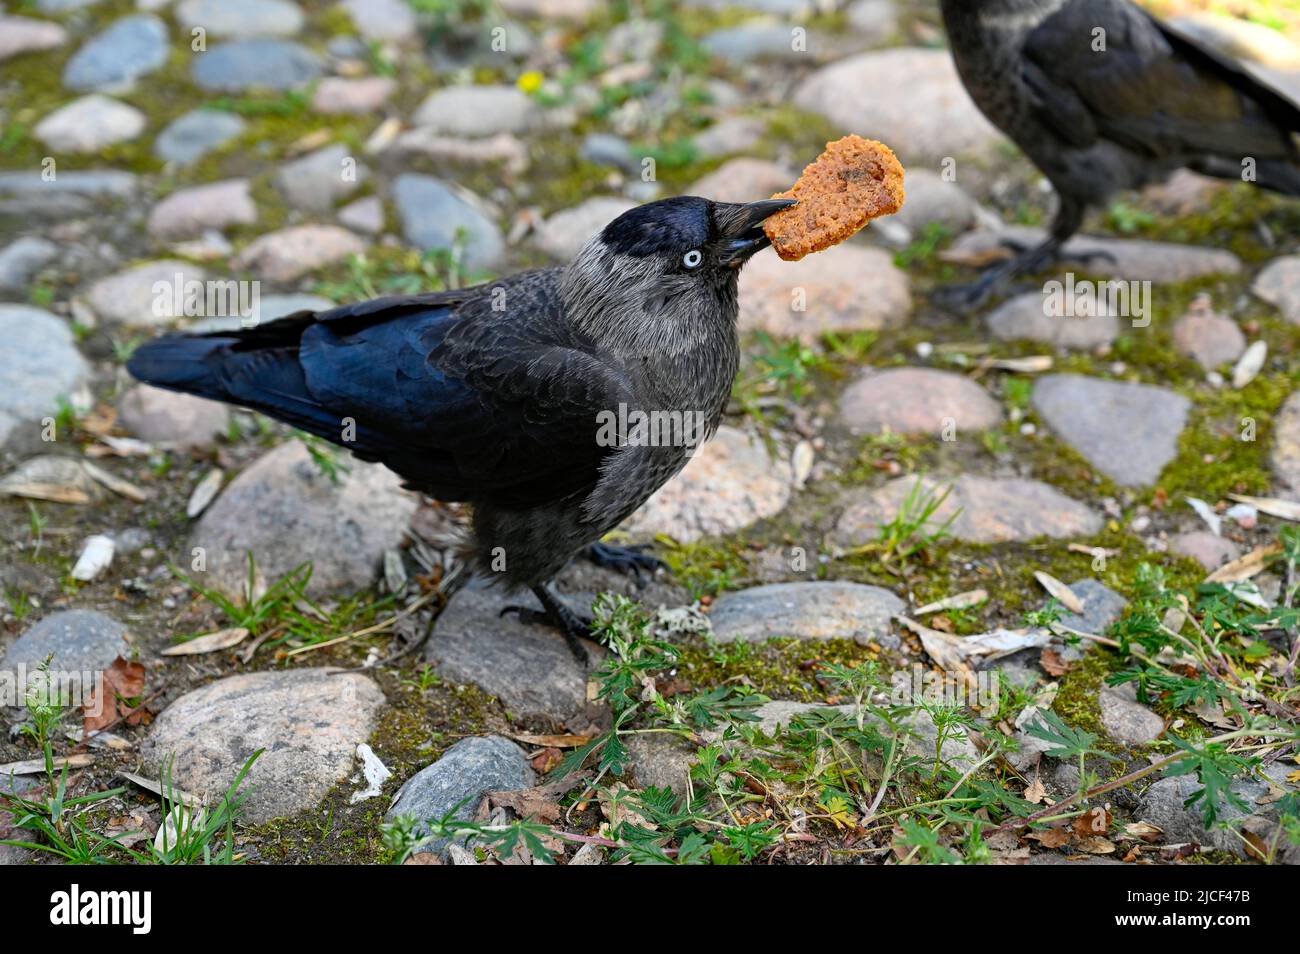 jackdaw eating cookie for dessert on stone square Stock Photo